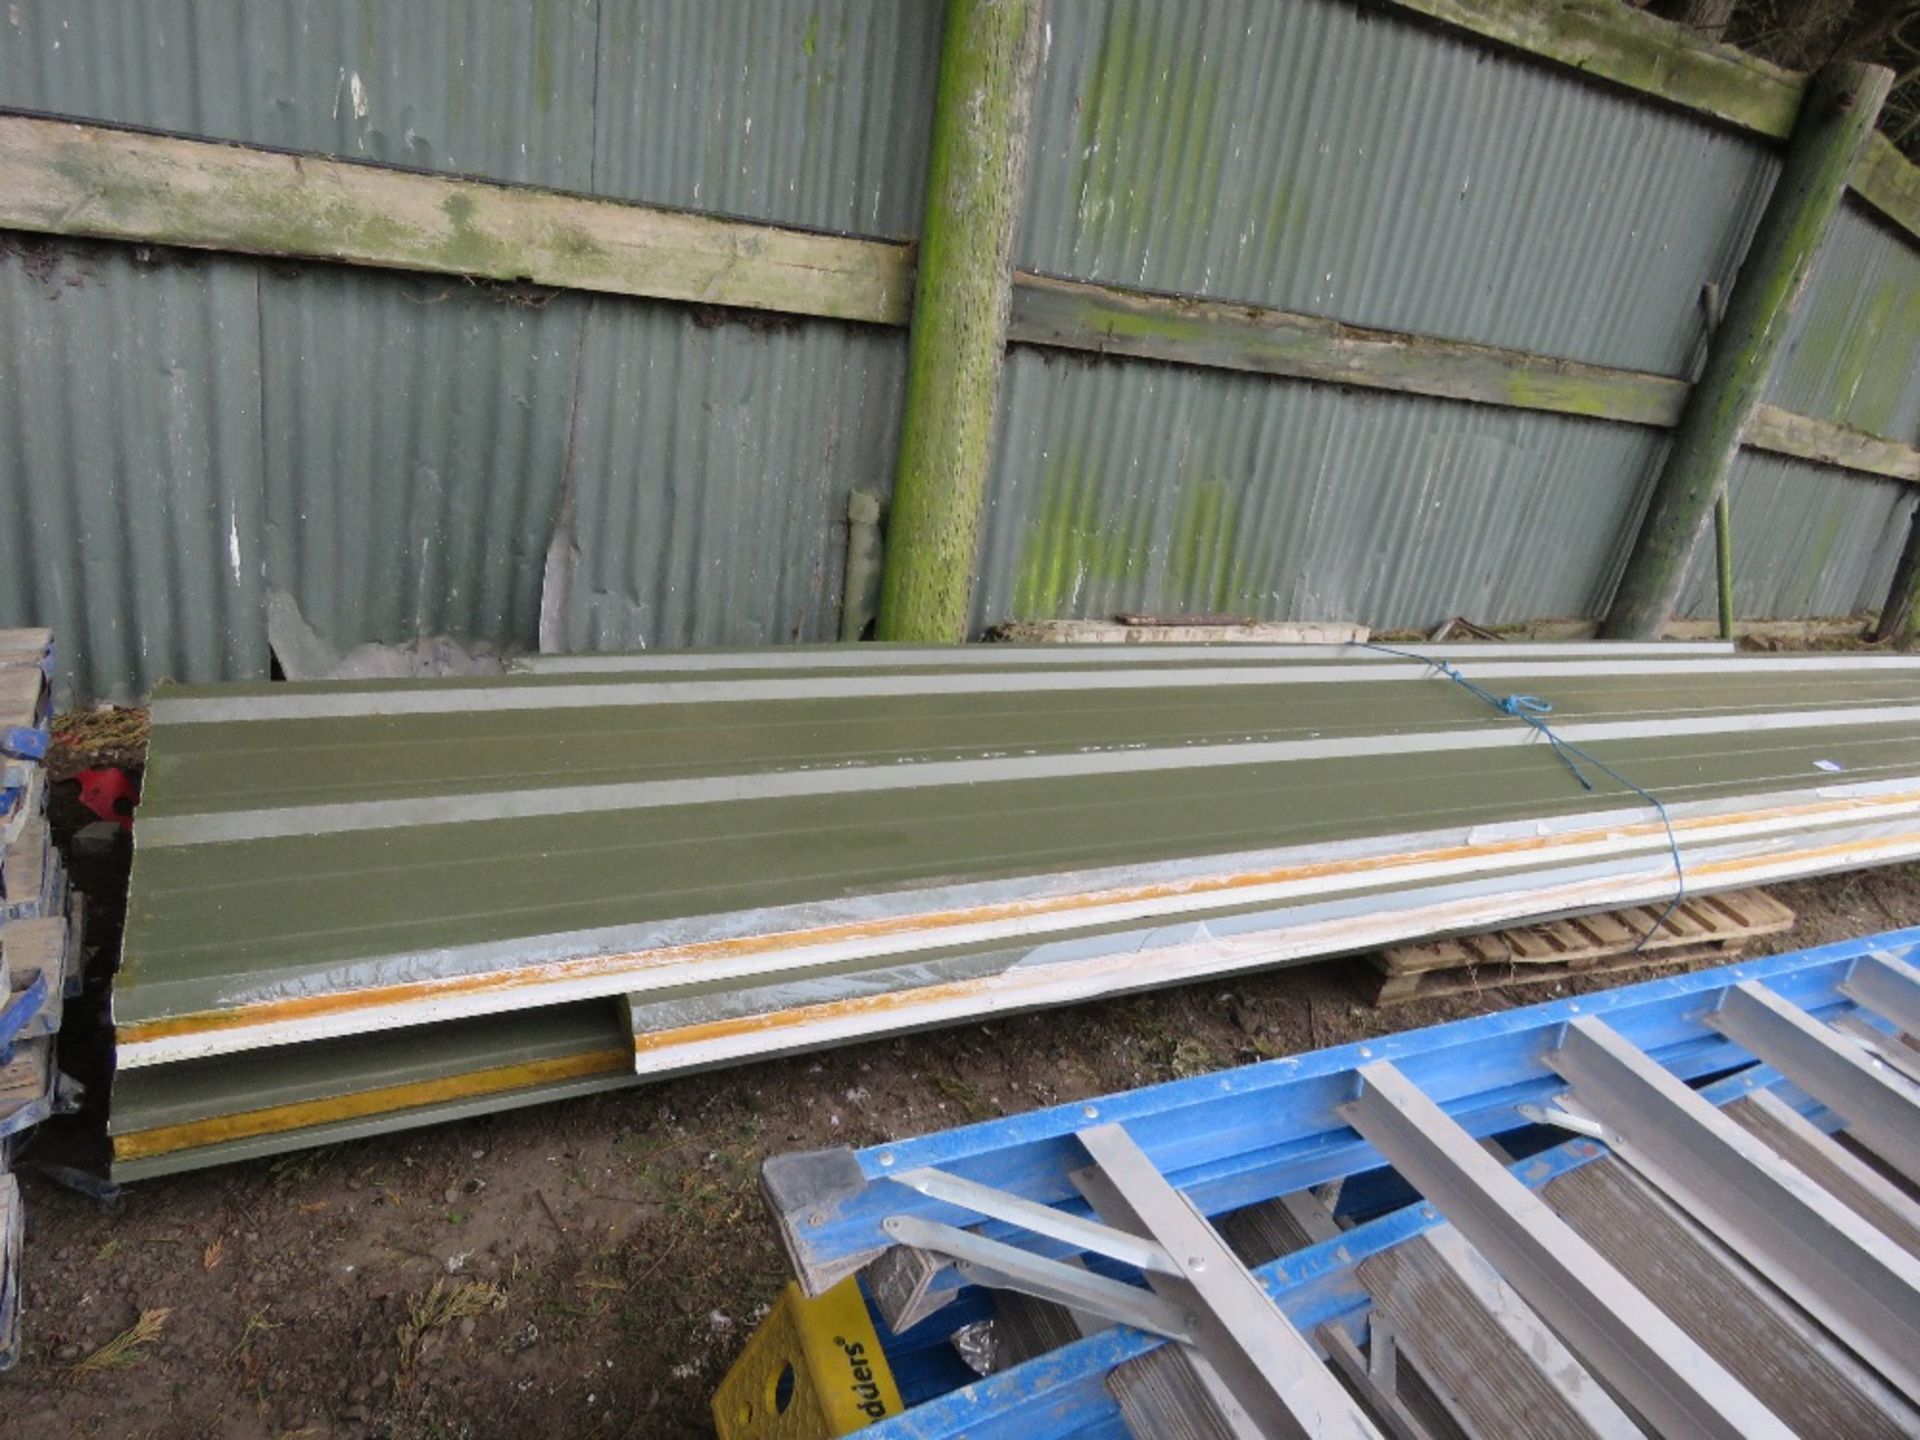 4 X INSULATED BOX PROFILE ROOF SHEETS, GREEN, 13-17FT LENGTH APPROX. THIS LOT IS SOLD UNDER THE AUC - Image 2 of 2